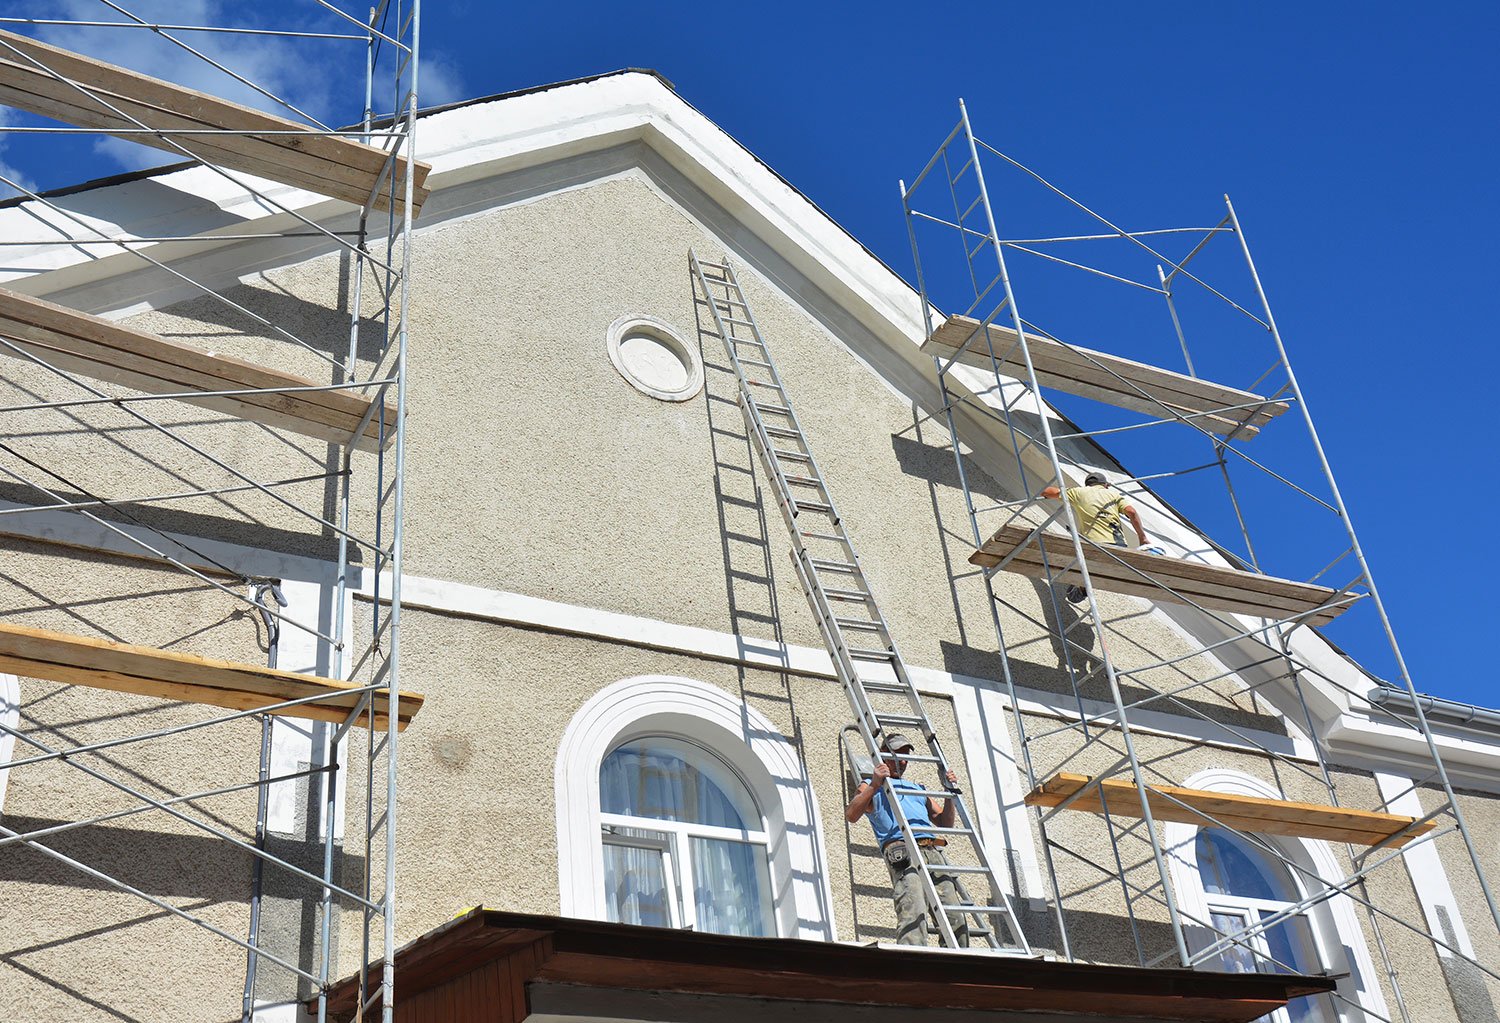 House painters working on a residential home